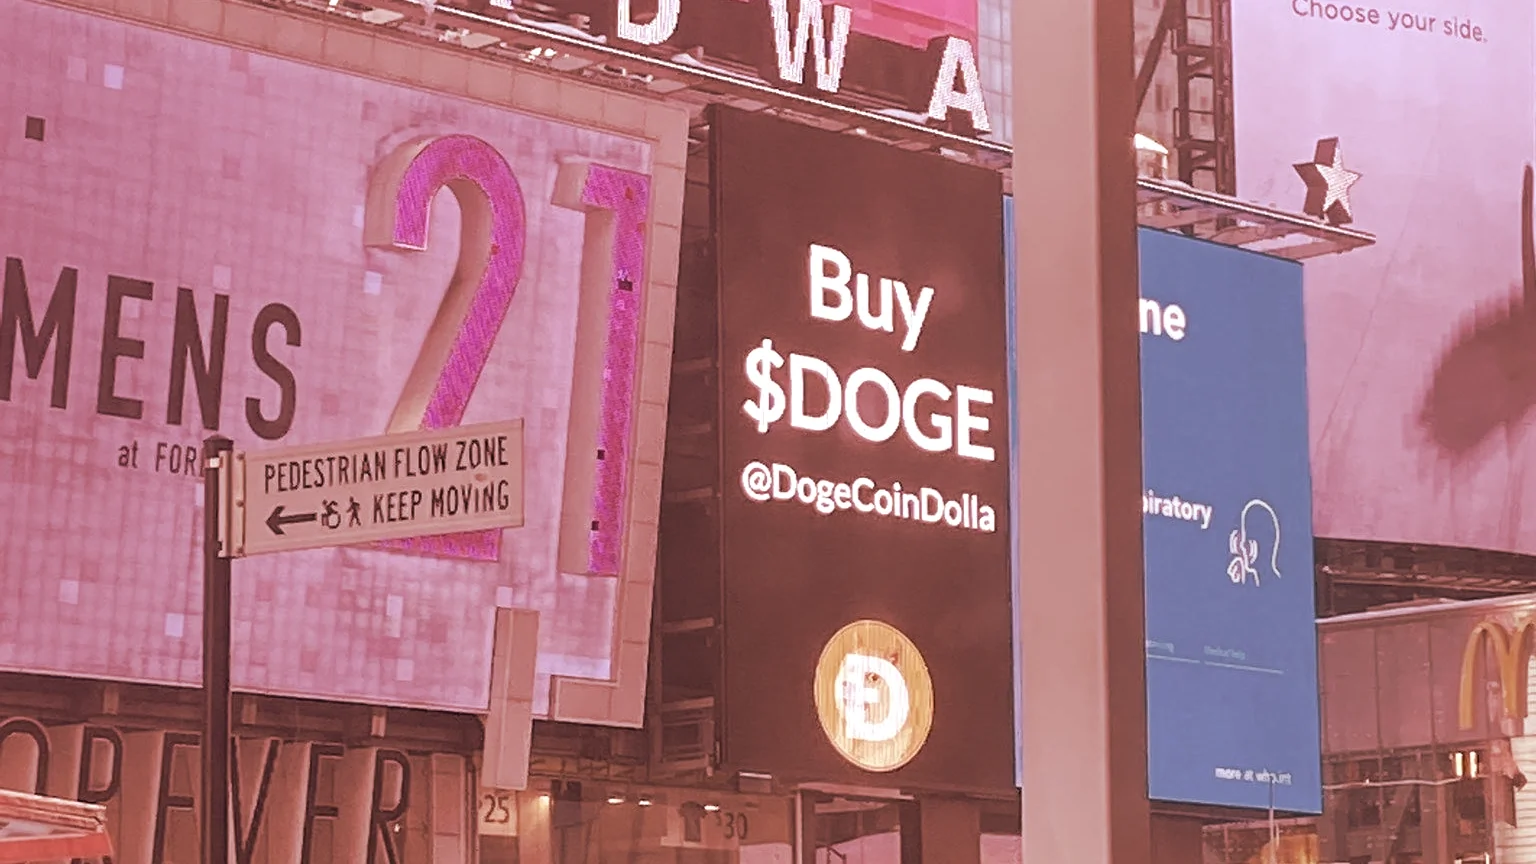 Dogecoin billboard in New York's Time Square. Image: DogeCoinDolla